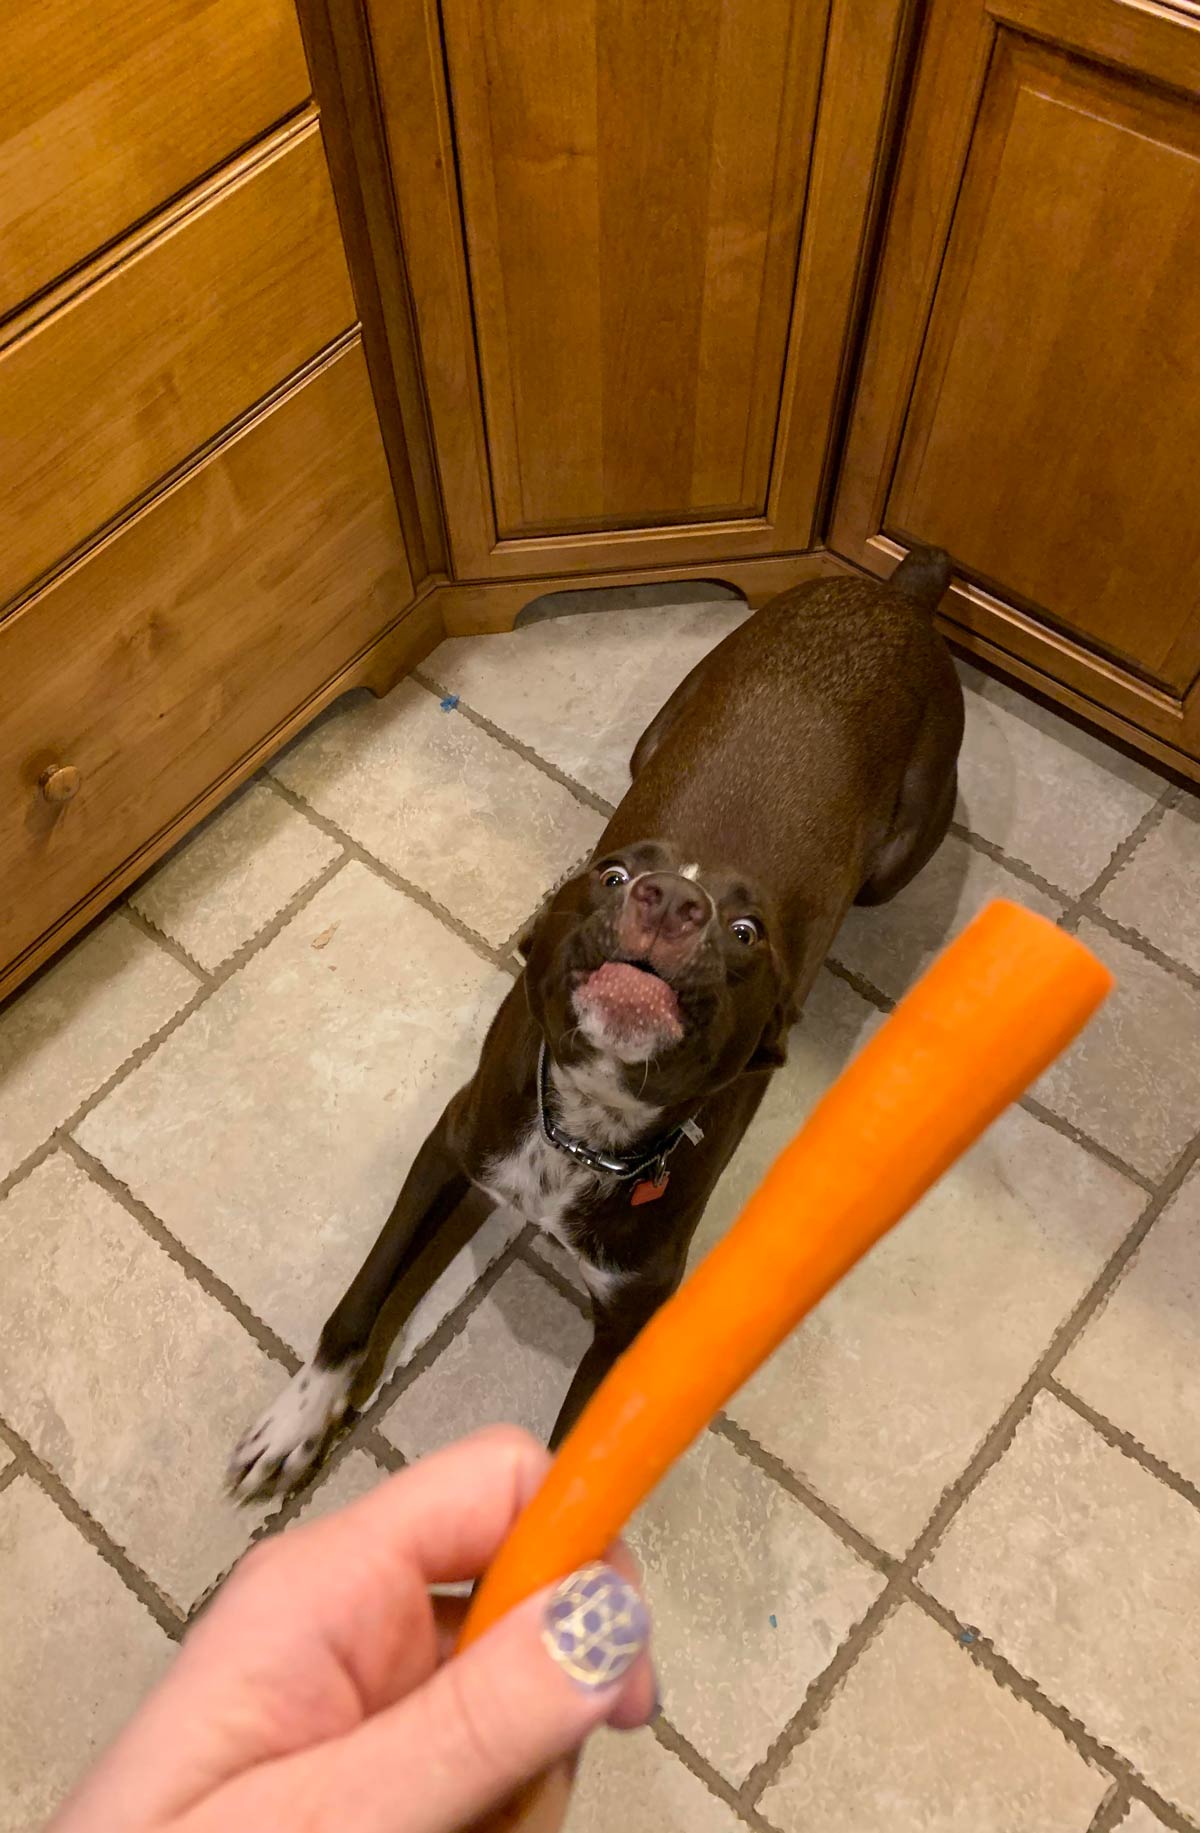 That carrot face